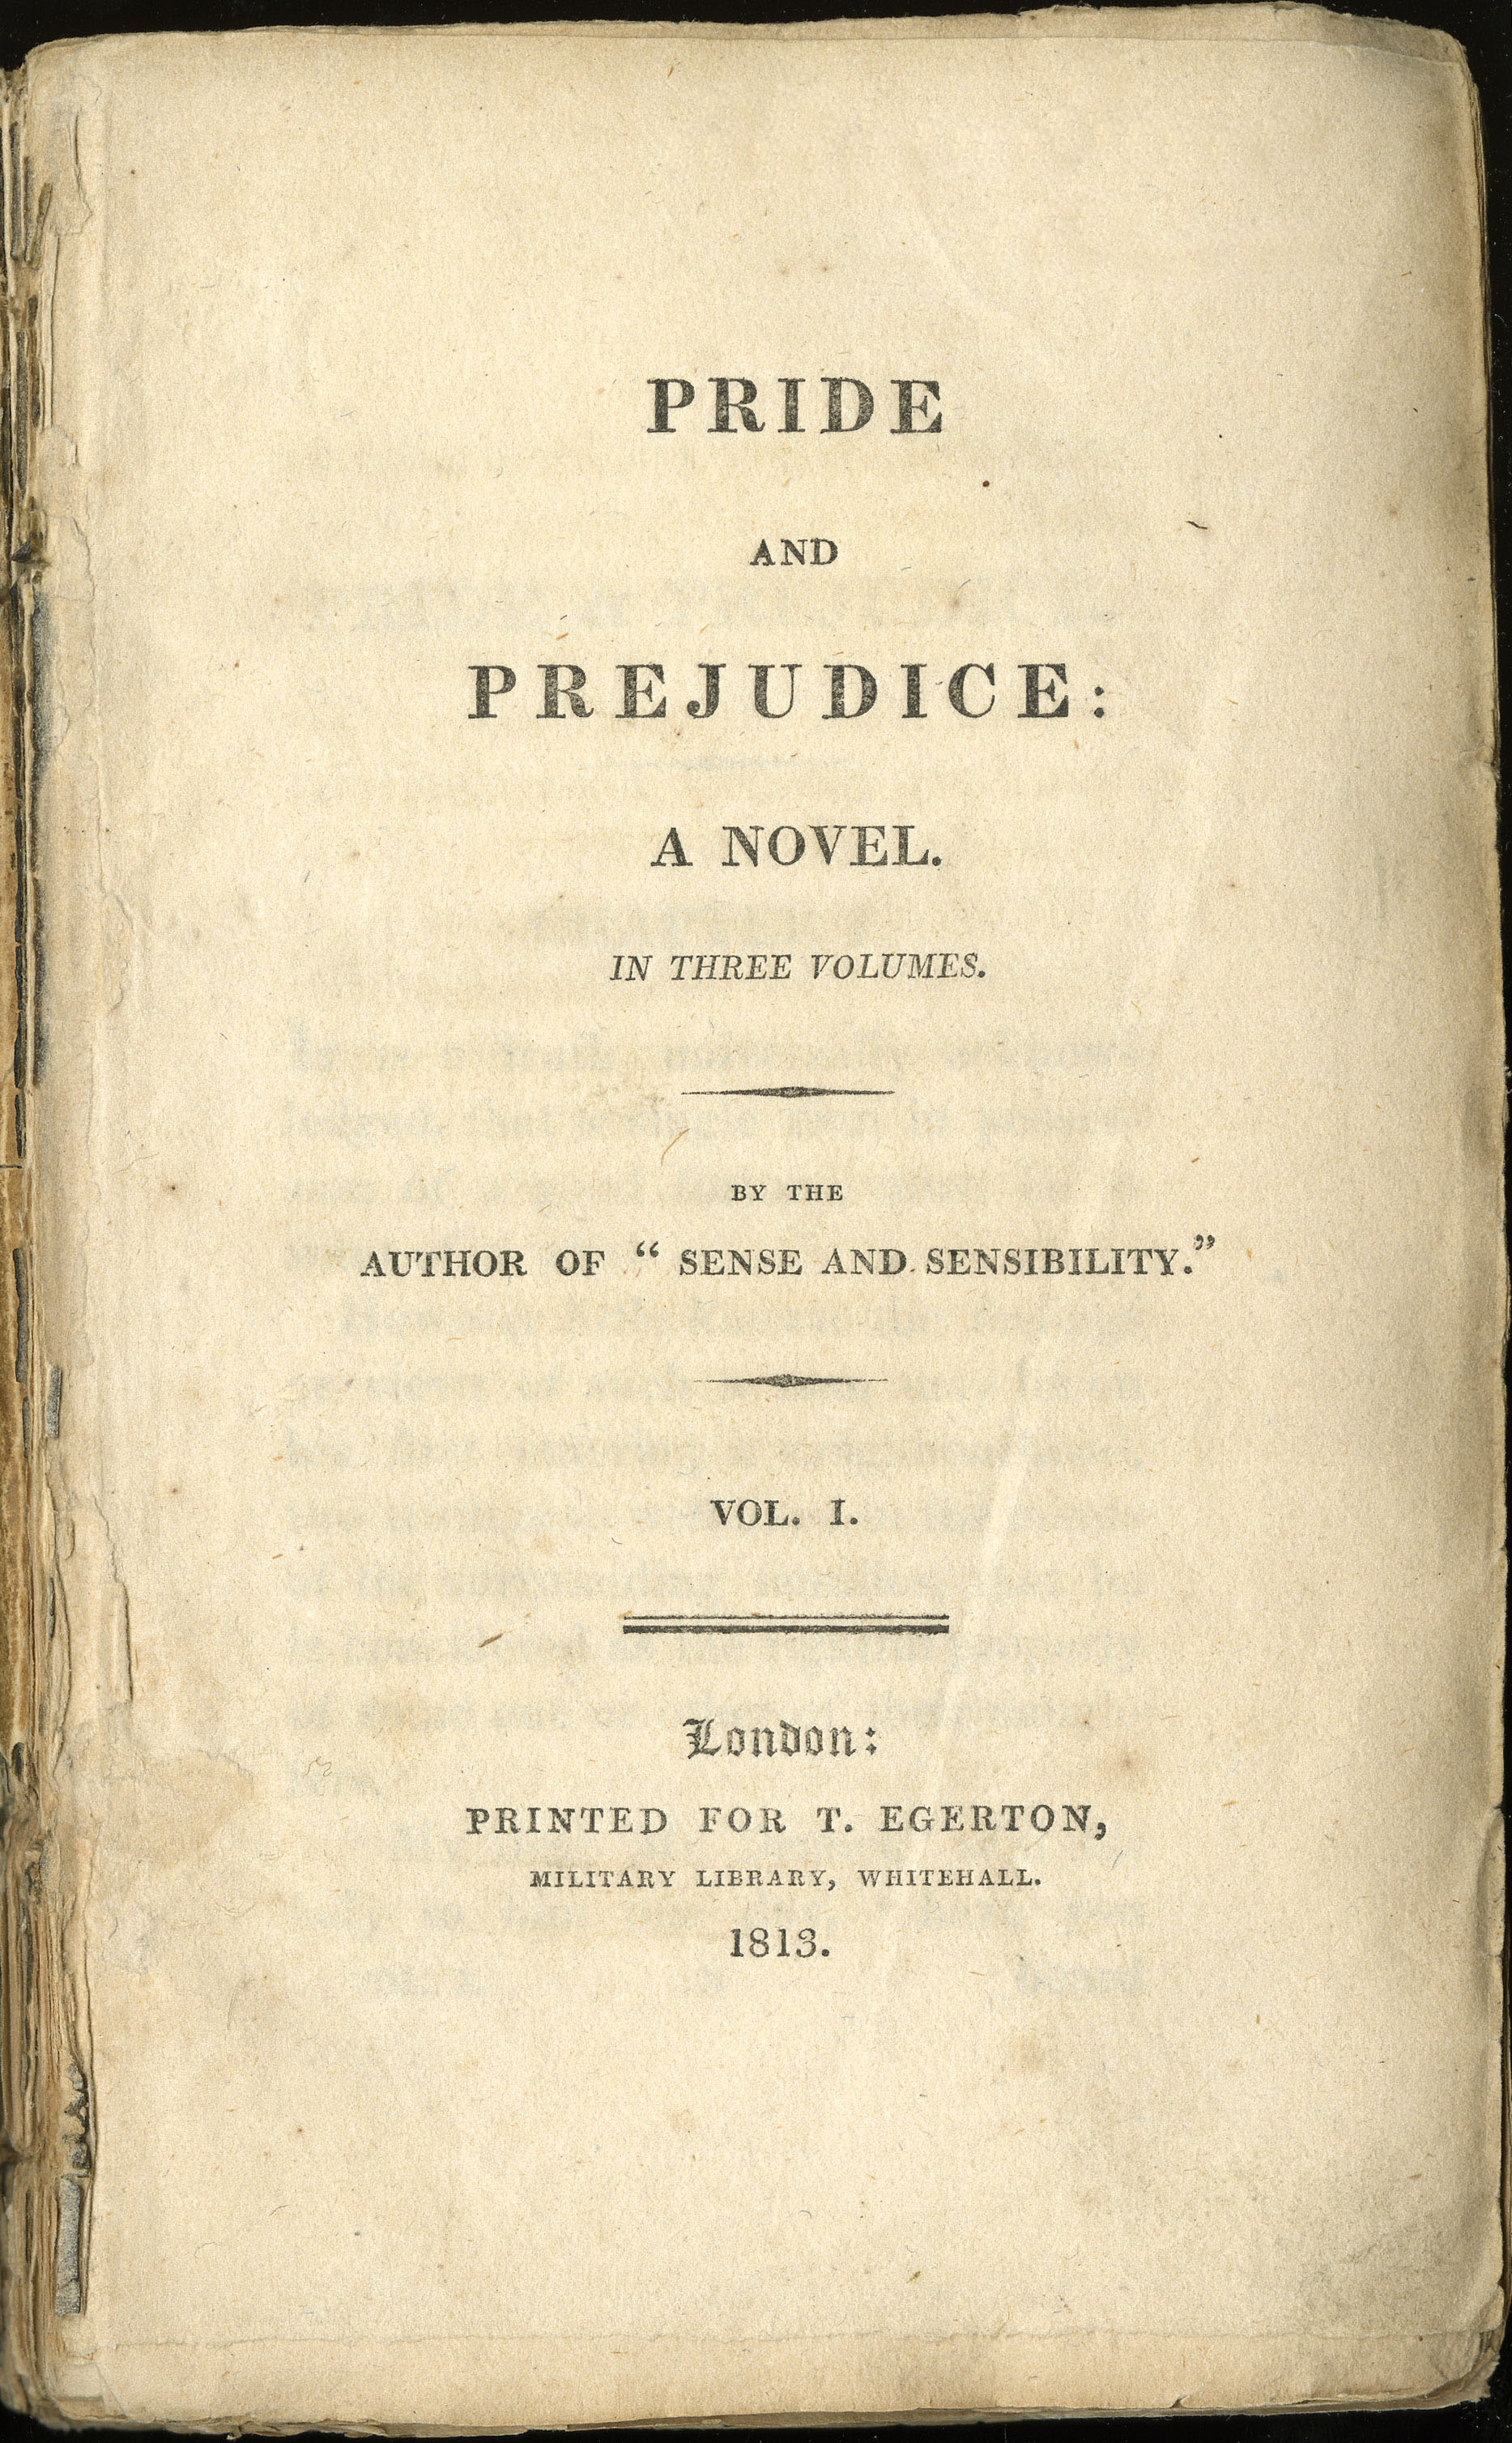 Title page for the first edition